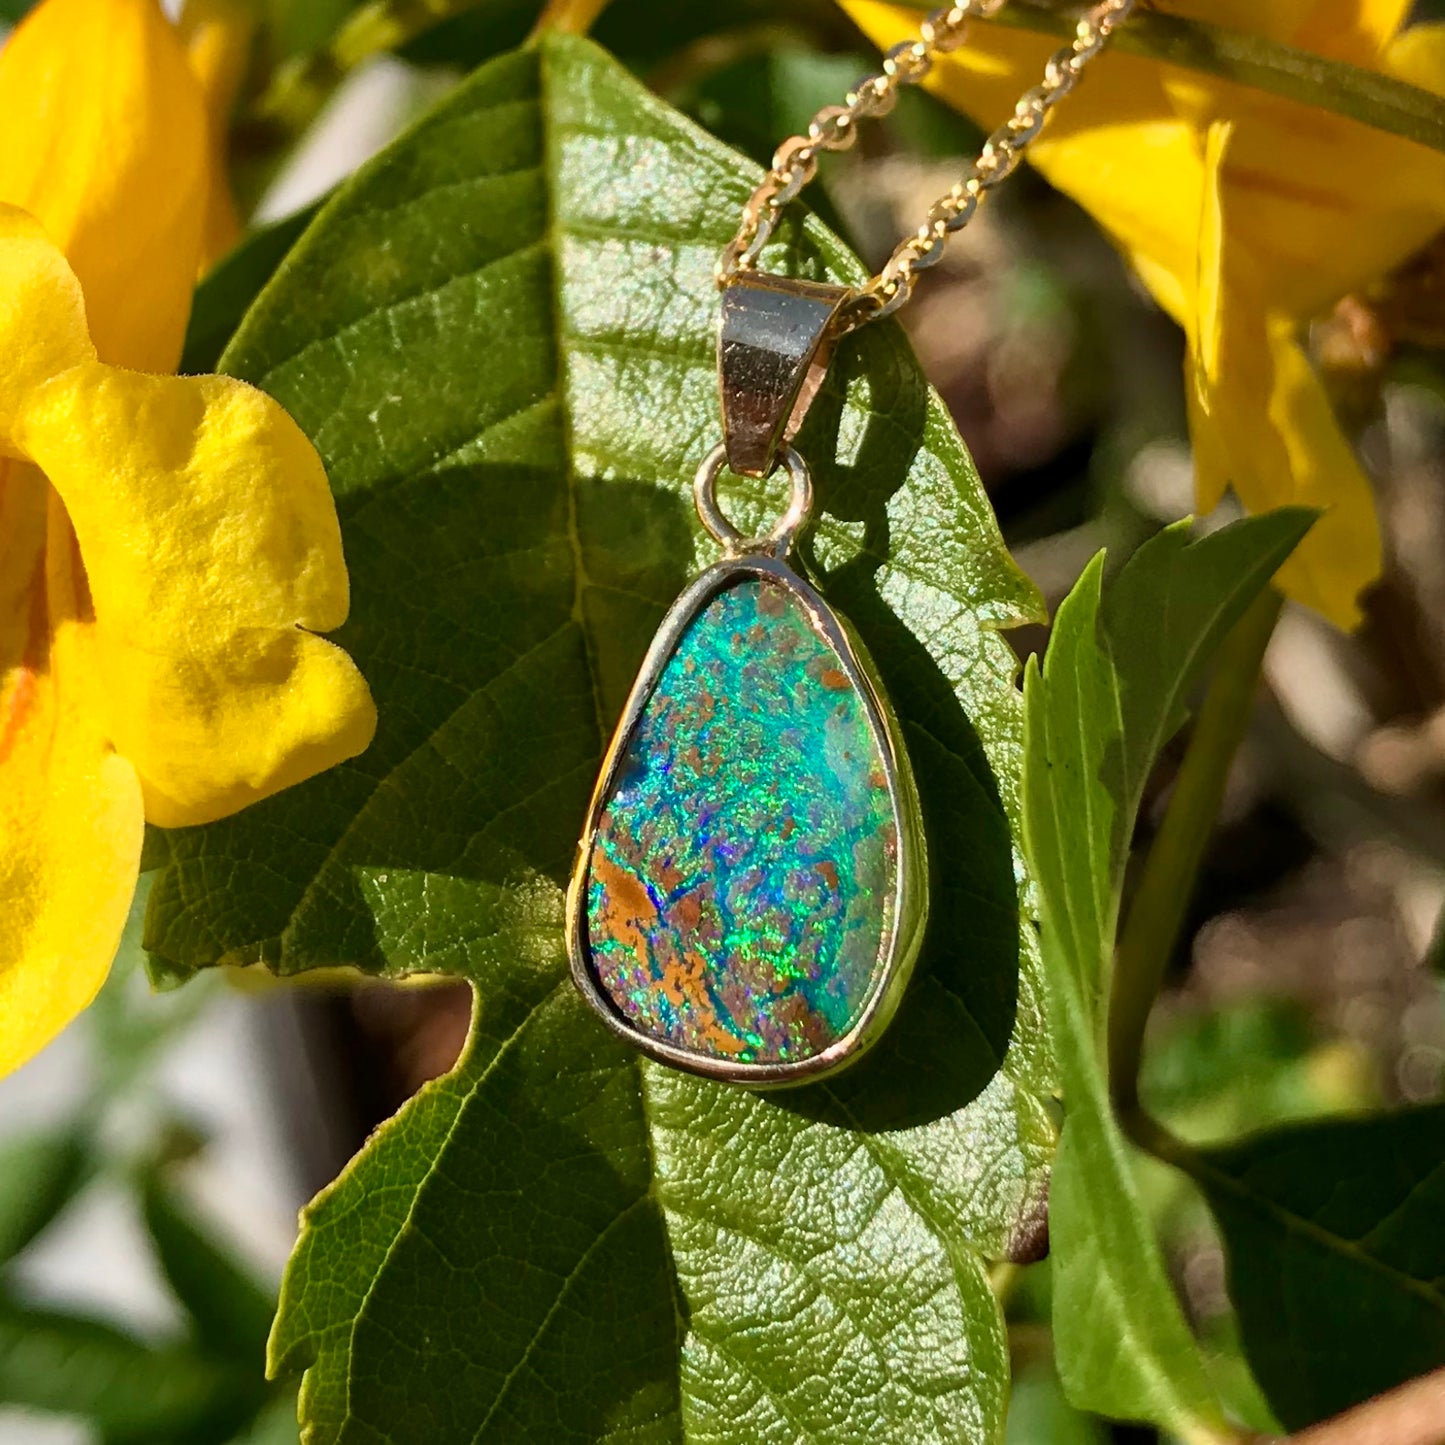 Green and blue Queensland boulder opal pendant in 14k yellow gold on cable chain.